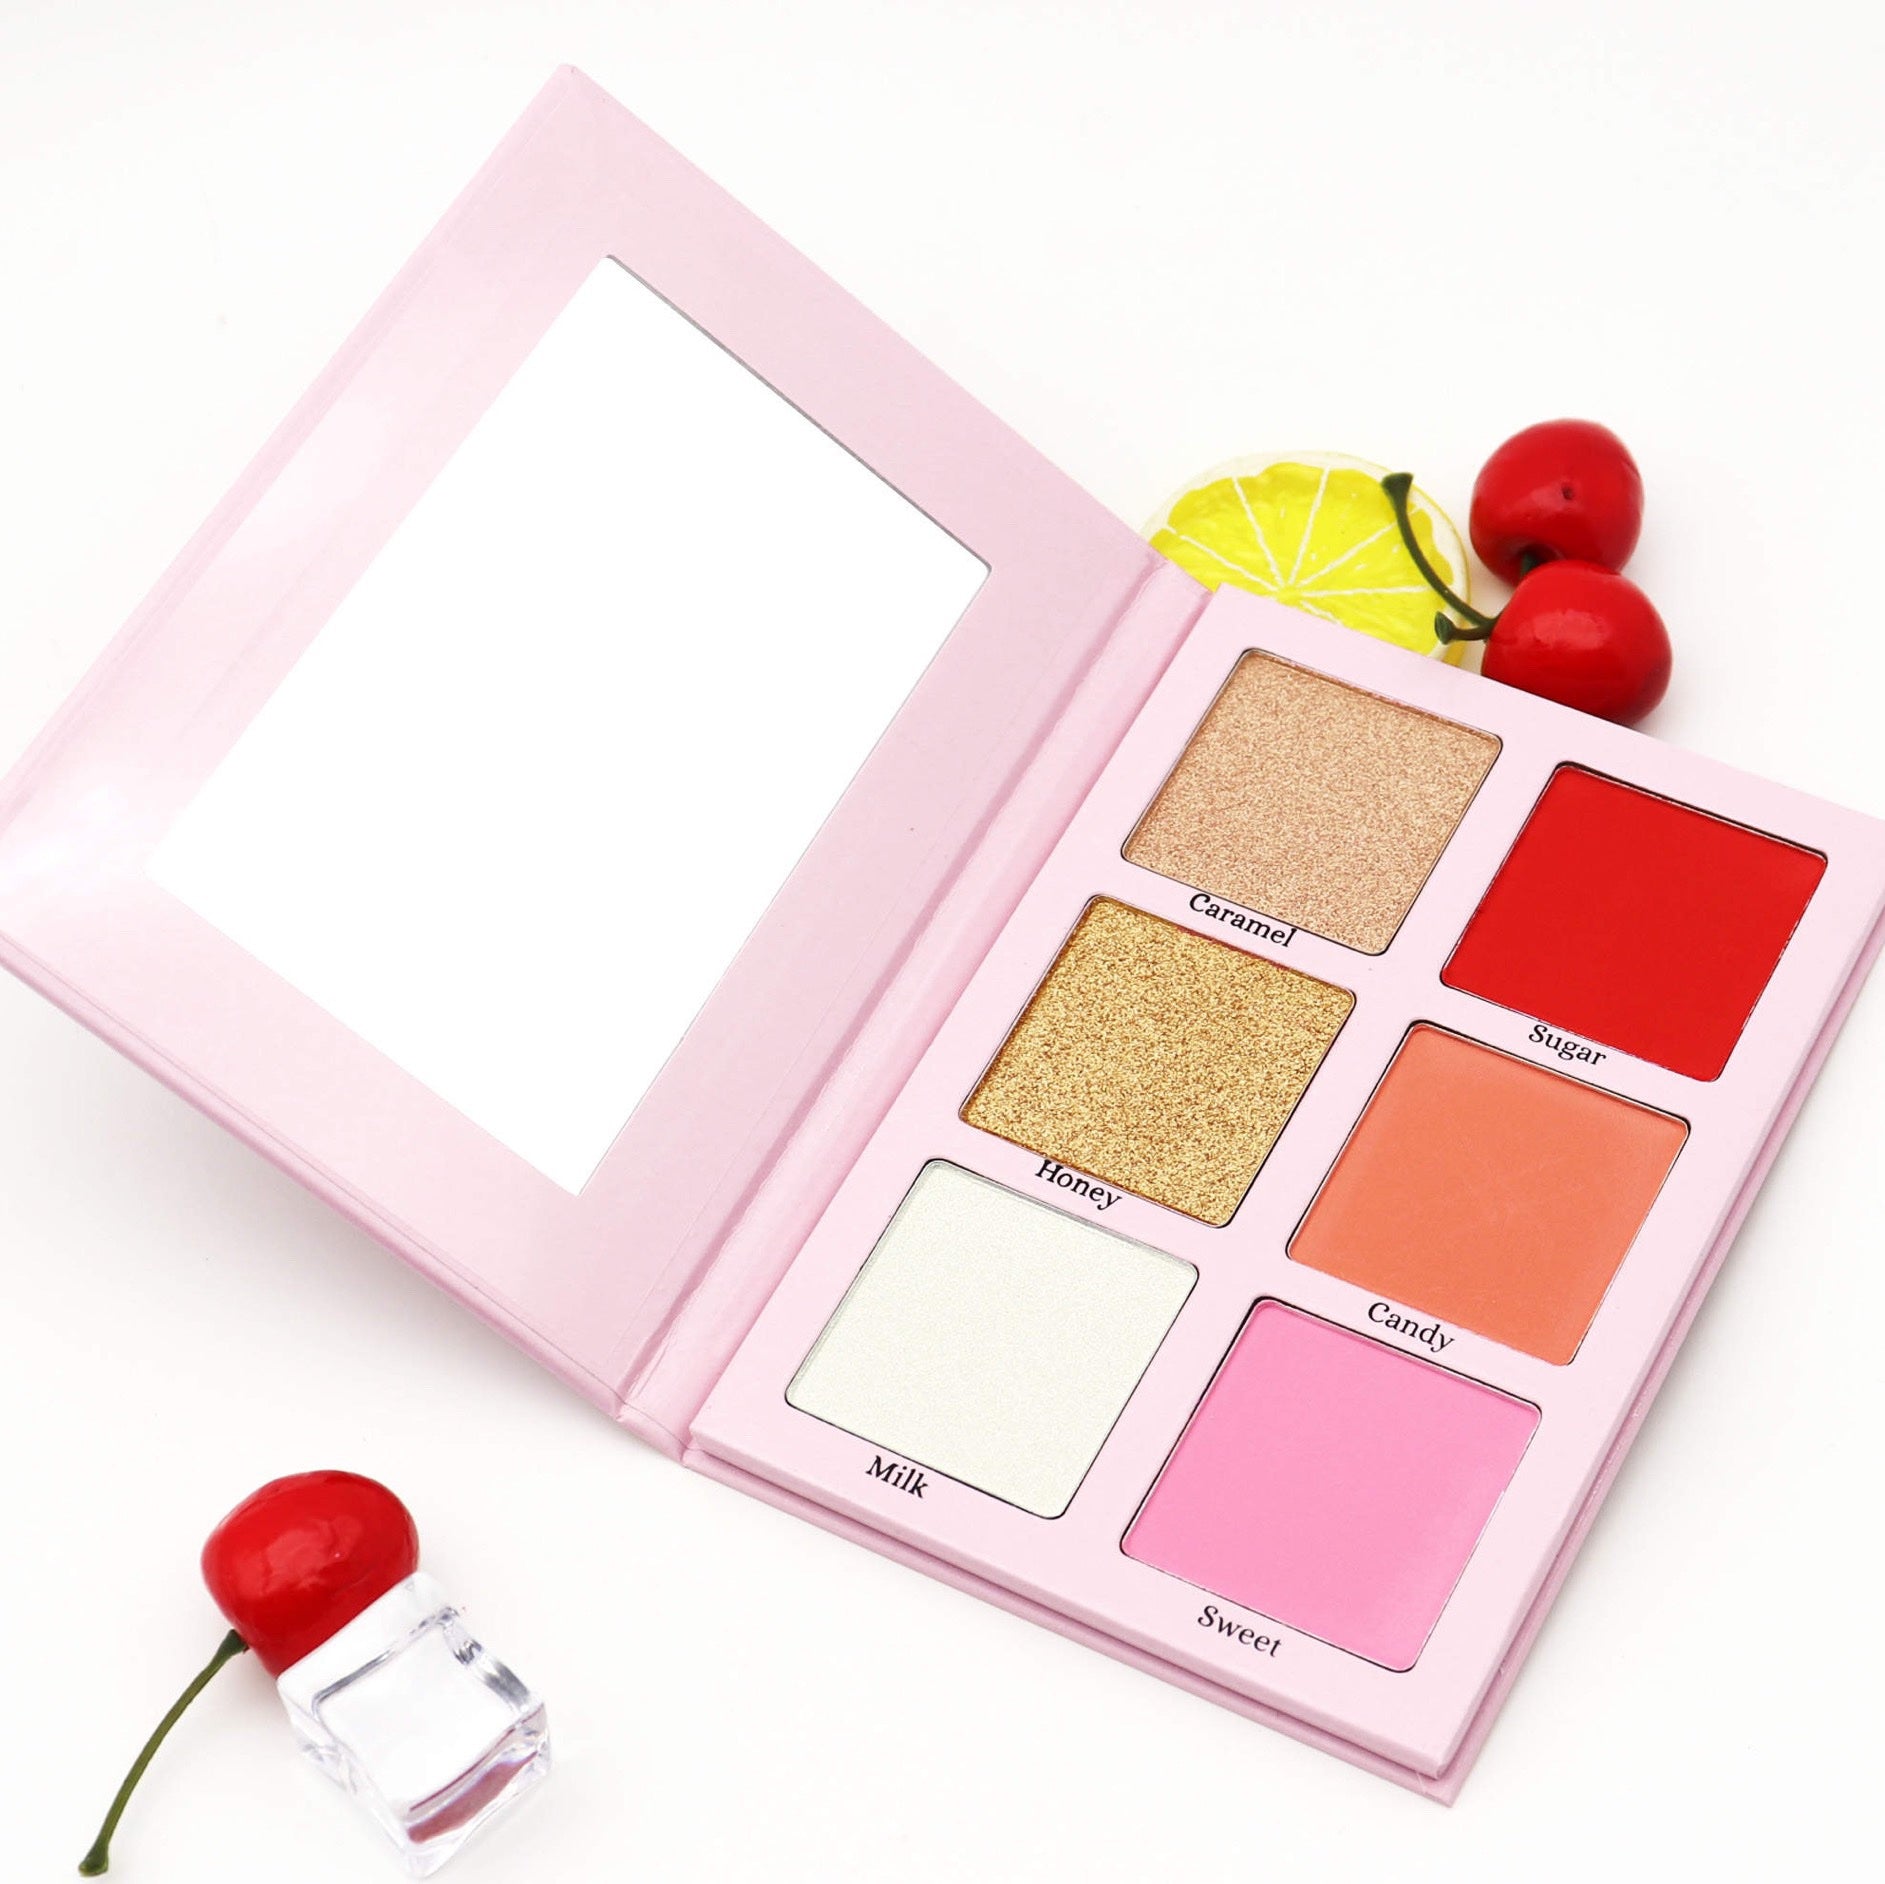 Sweet Tooth Face Palette